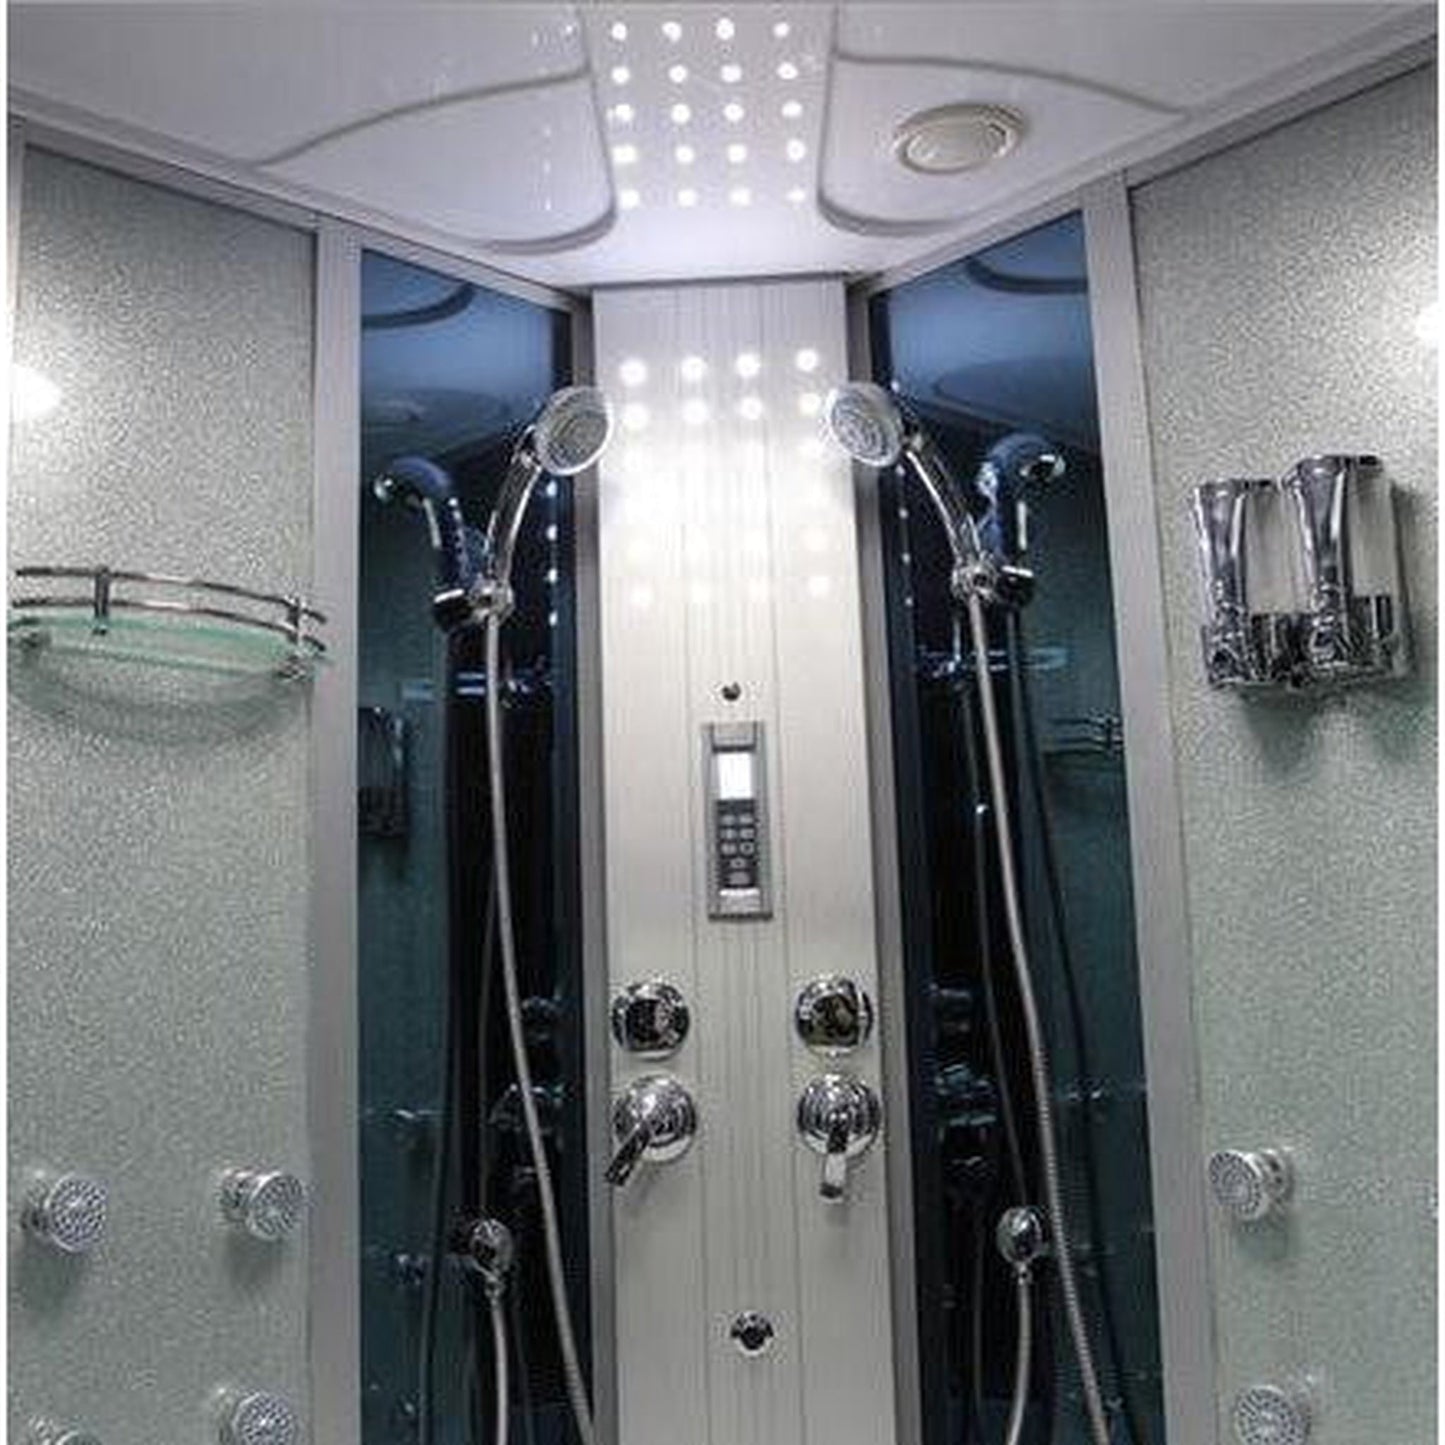 Mesa 66" x 66" x 85" Corner Blue Tempered Glass Combination Steam Shower Jetted Tub With 4kW Steam Generation, 12 Acupuncture Body Jets and 6 Whirlpool Jets